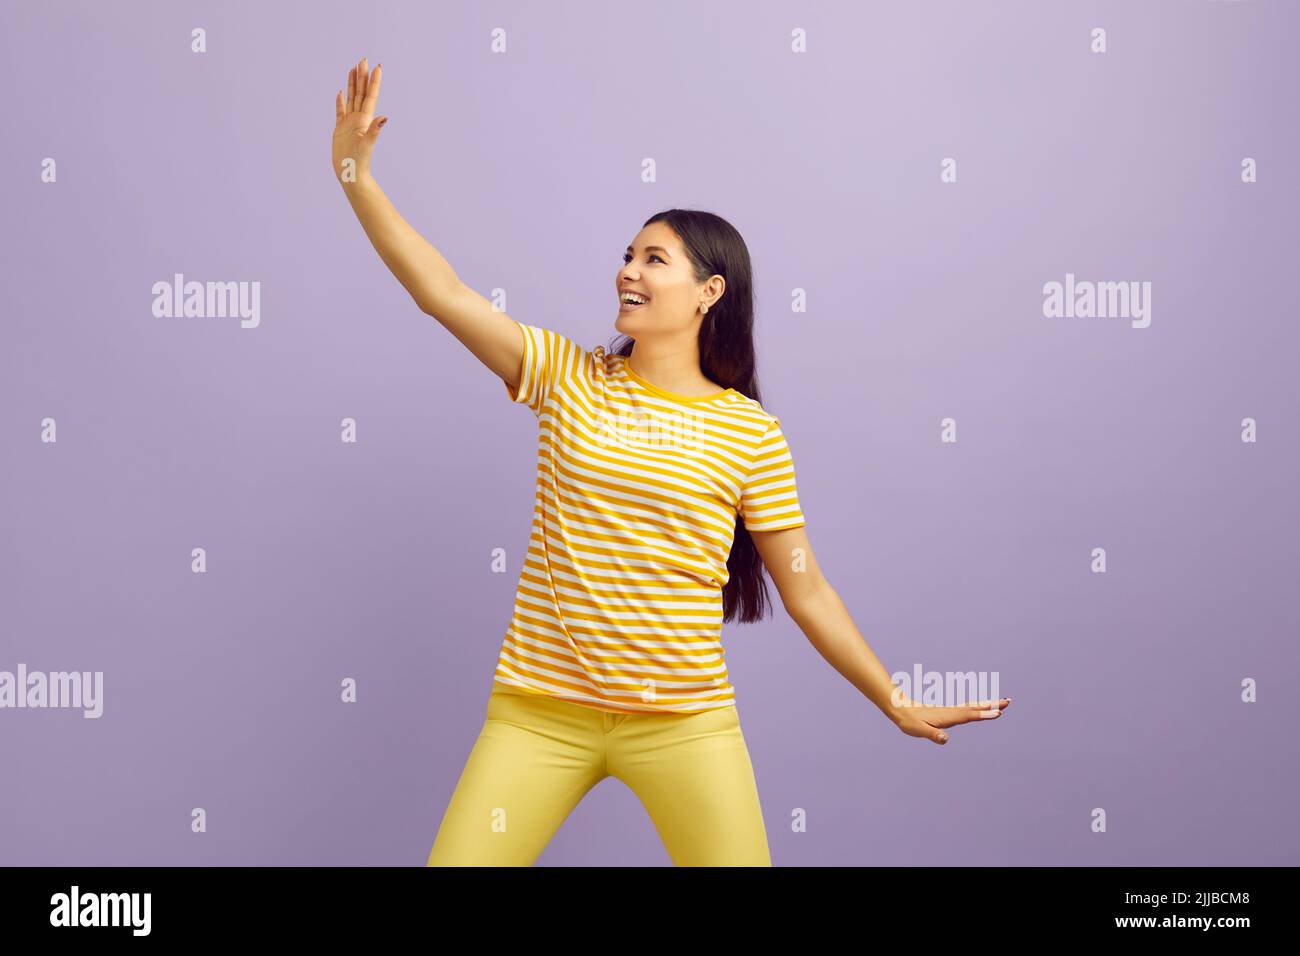 Funny crazy woman having fun showing funny movements on pastel purple background. Stock Photo